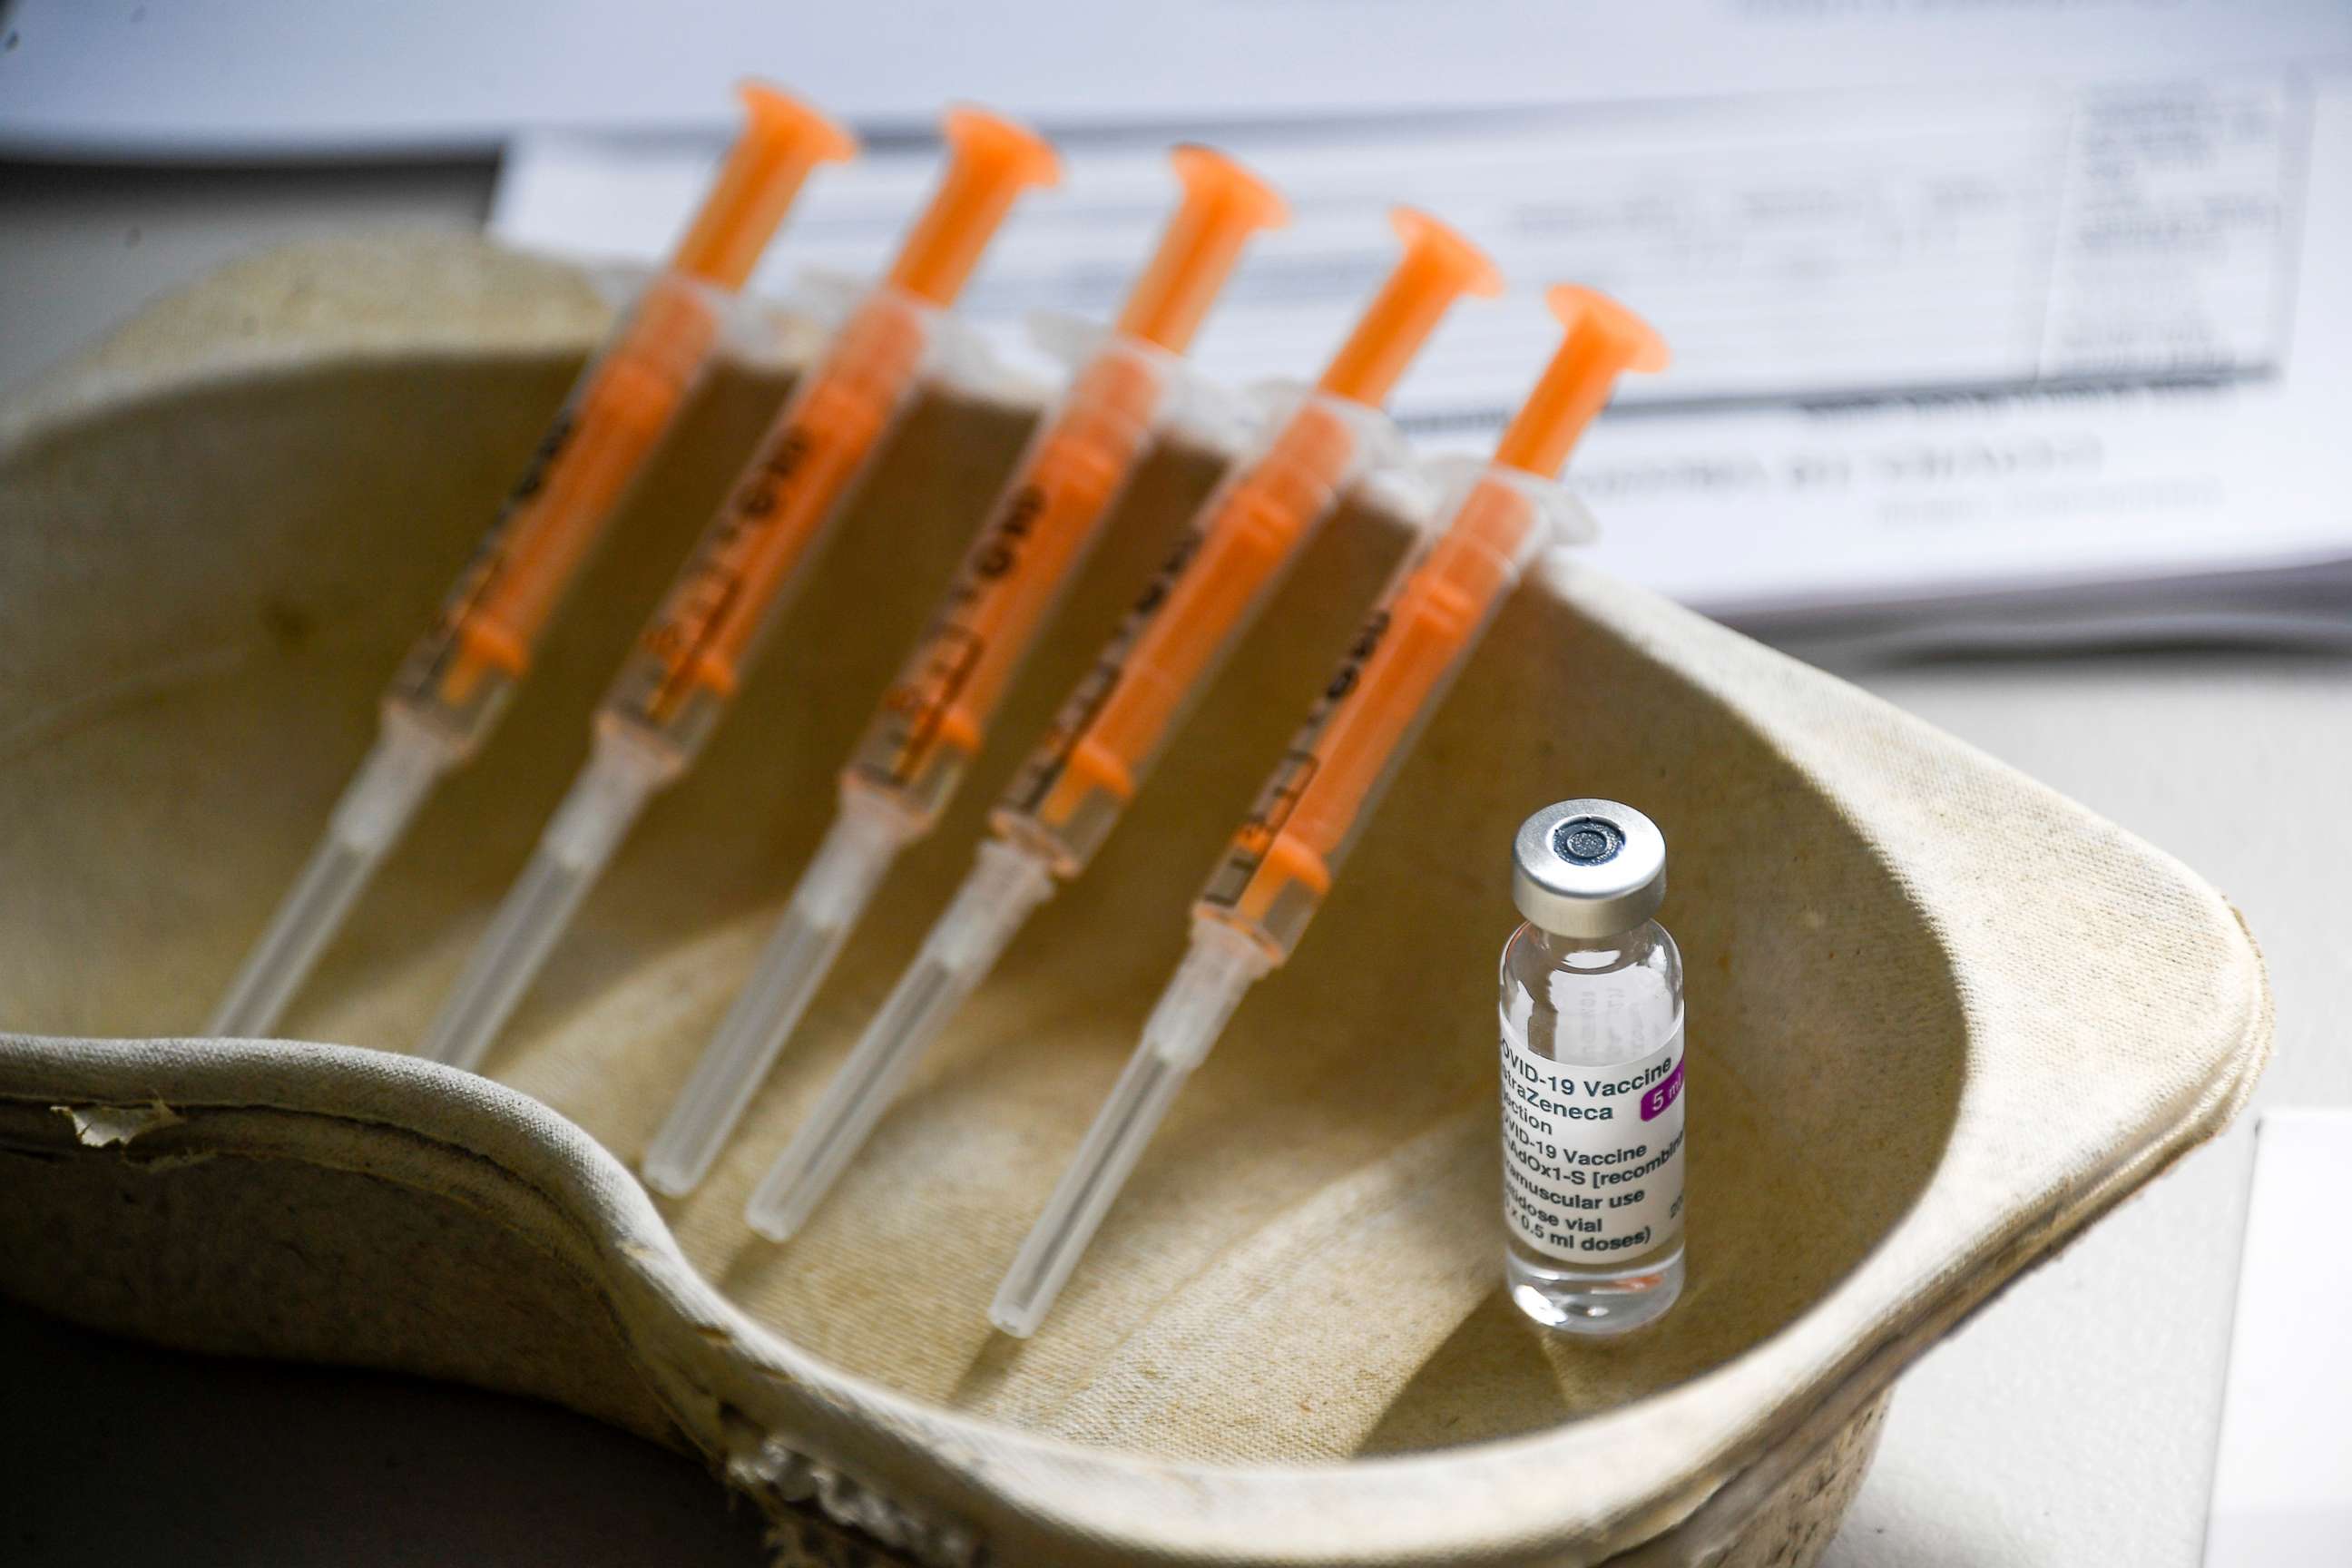 PHOTO: A vial of the AstraZeneca COVID-19 vaccine awaits recipients at a vaccine clinic, in Luton, England, March 21, 2021. AstraZeneca said on March 22, 2021 that advanced trial data from a U.S. study on its COVID vaccine shows it is 79% effective.